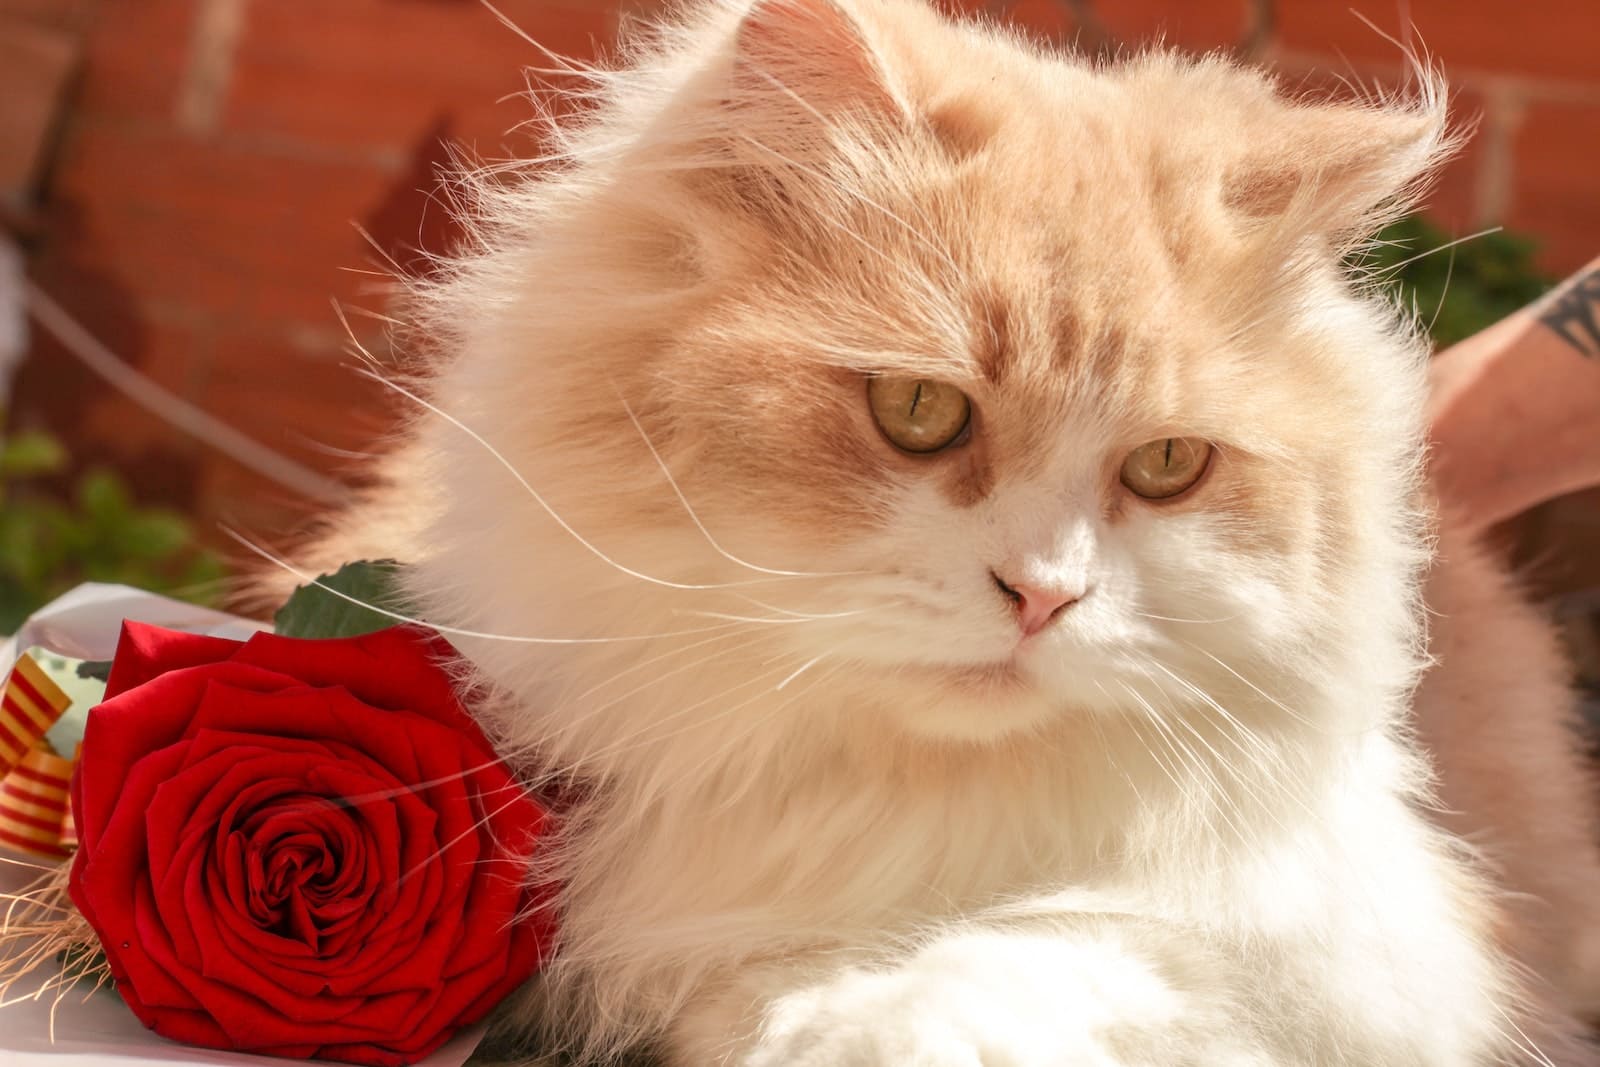 White and Beige Persian Cat Beside Red Rose